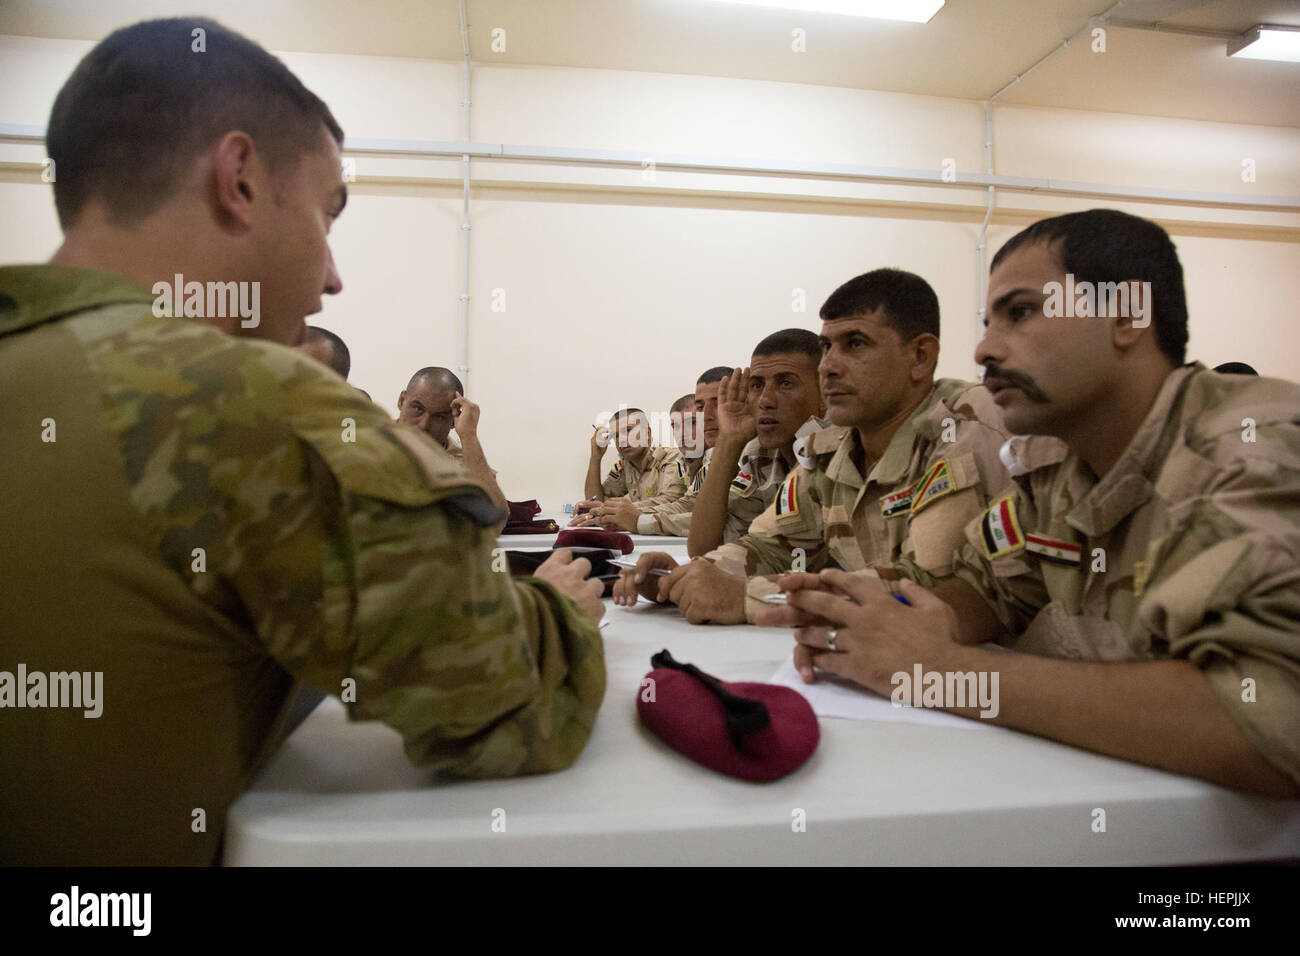 An Australian soldier assigned to Task Group Taji speaks to a group of Iraqi soldiers attending the noncommissioned officer academy at Camp Taji, Iraq, Aug. 22, 2015. Task Group Taji spearheaded the academy concept in order to teach Iraqi NCOs how to train and care for their soldiers in different situations. Through professional development with the Iraqi NCOs, Combined Joint Task Force – Operation Inherent Resolve is empowering the Iraqi security forces in the fight against the Islamic State of Iraq and the Levant. (U.S. Army photo by Spc. Paris Maxey/Released) Iraqis attend NCO academy 15082 Stock Photo